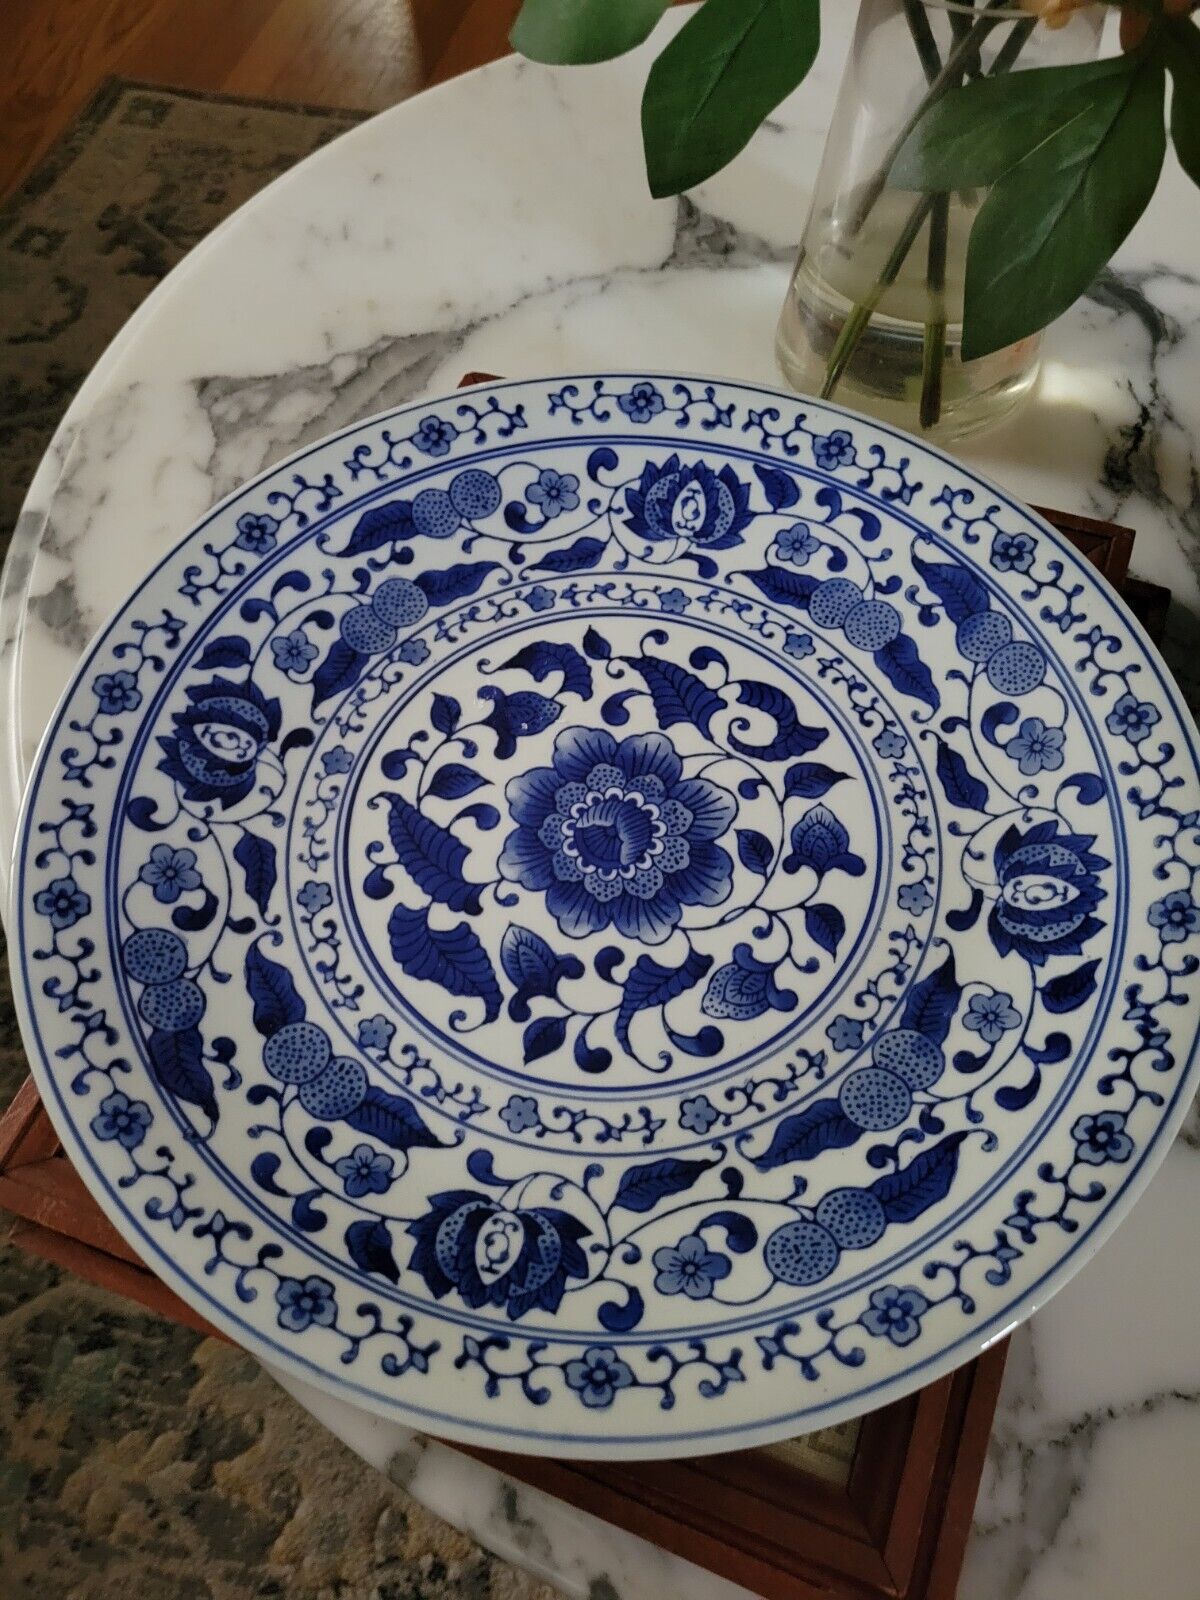 Antique Chinese large 12.5" charger plate porcelain blue and white floral